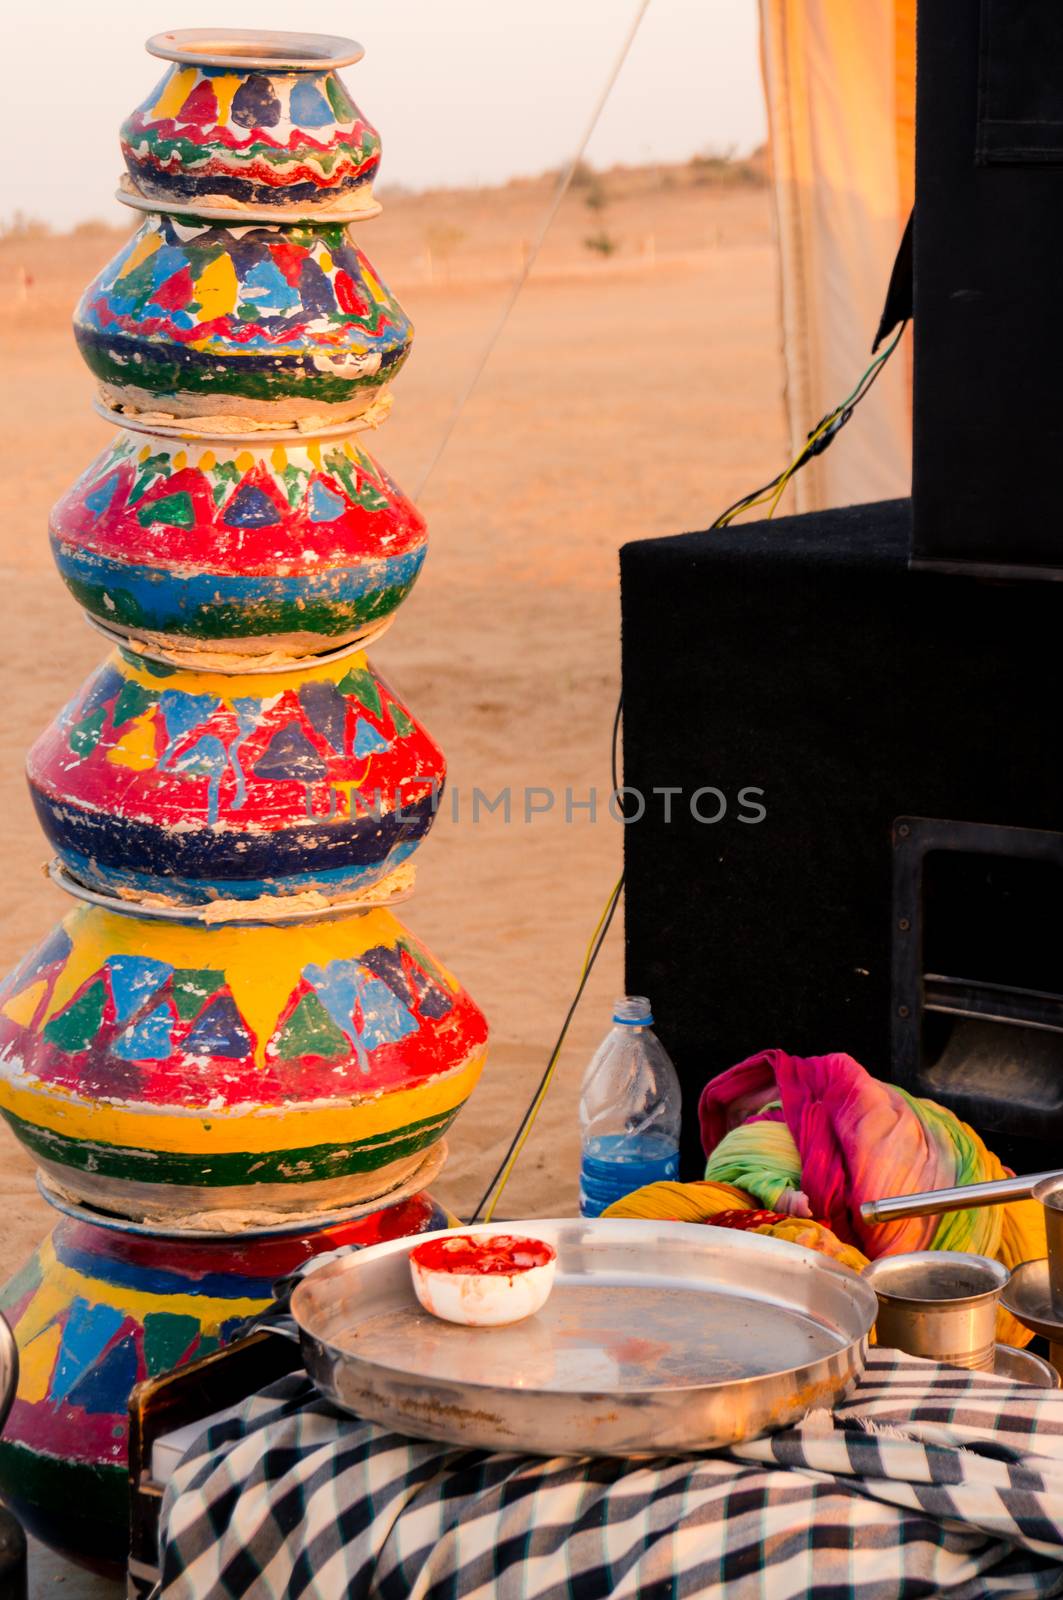 Evening shot showing the props like clayware pots, clay pots, dishes, kettle, mics and more as props for traditional rajasthani dances for visitor entertainment at a desert camp by Shalinimathur